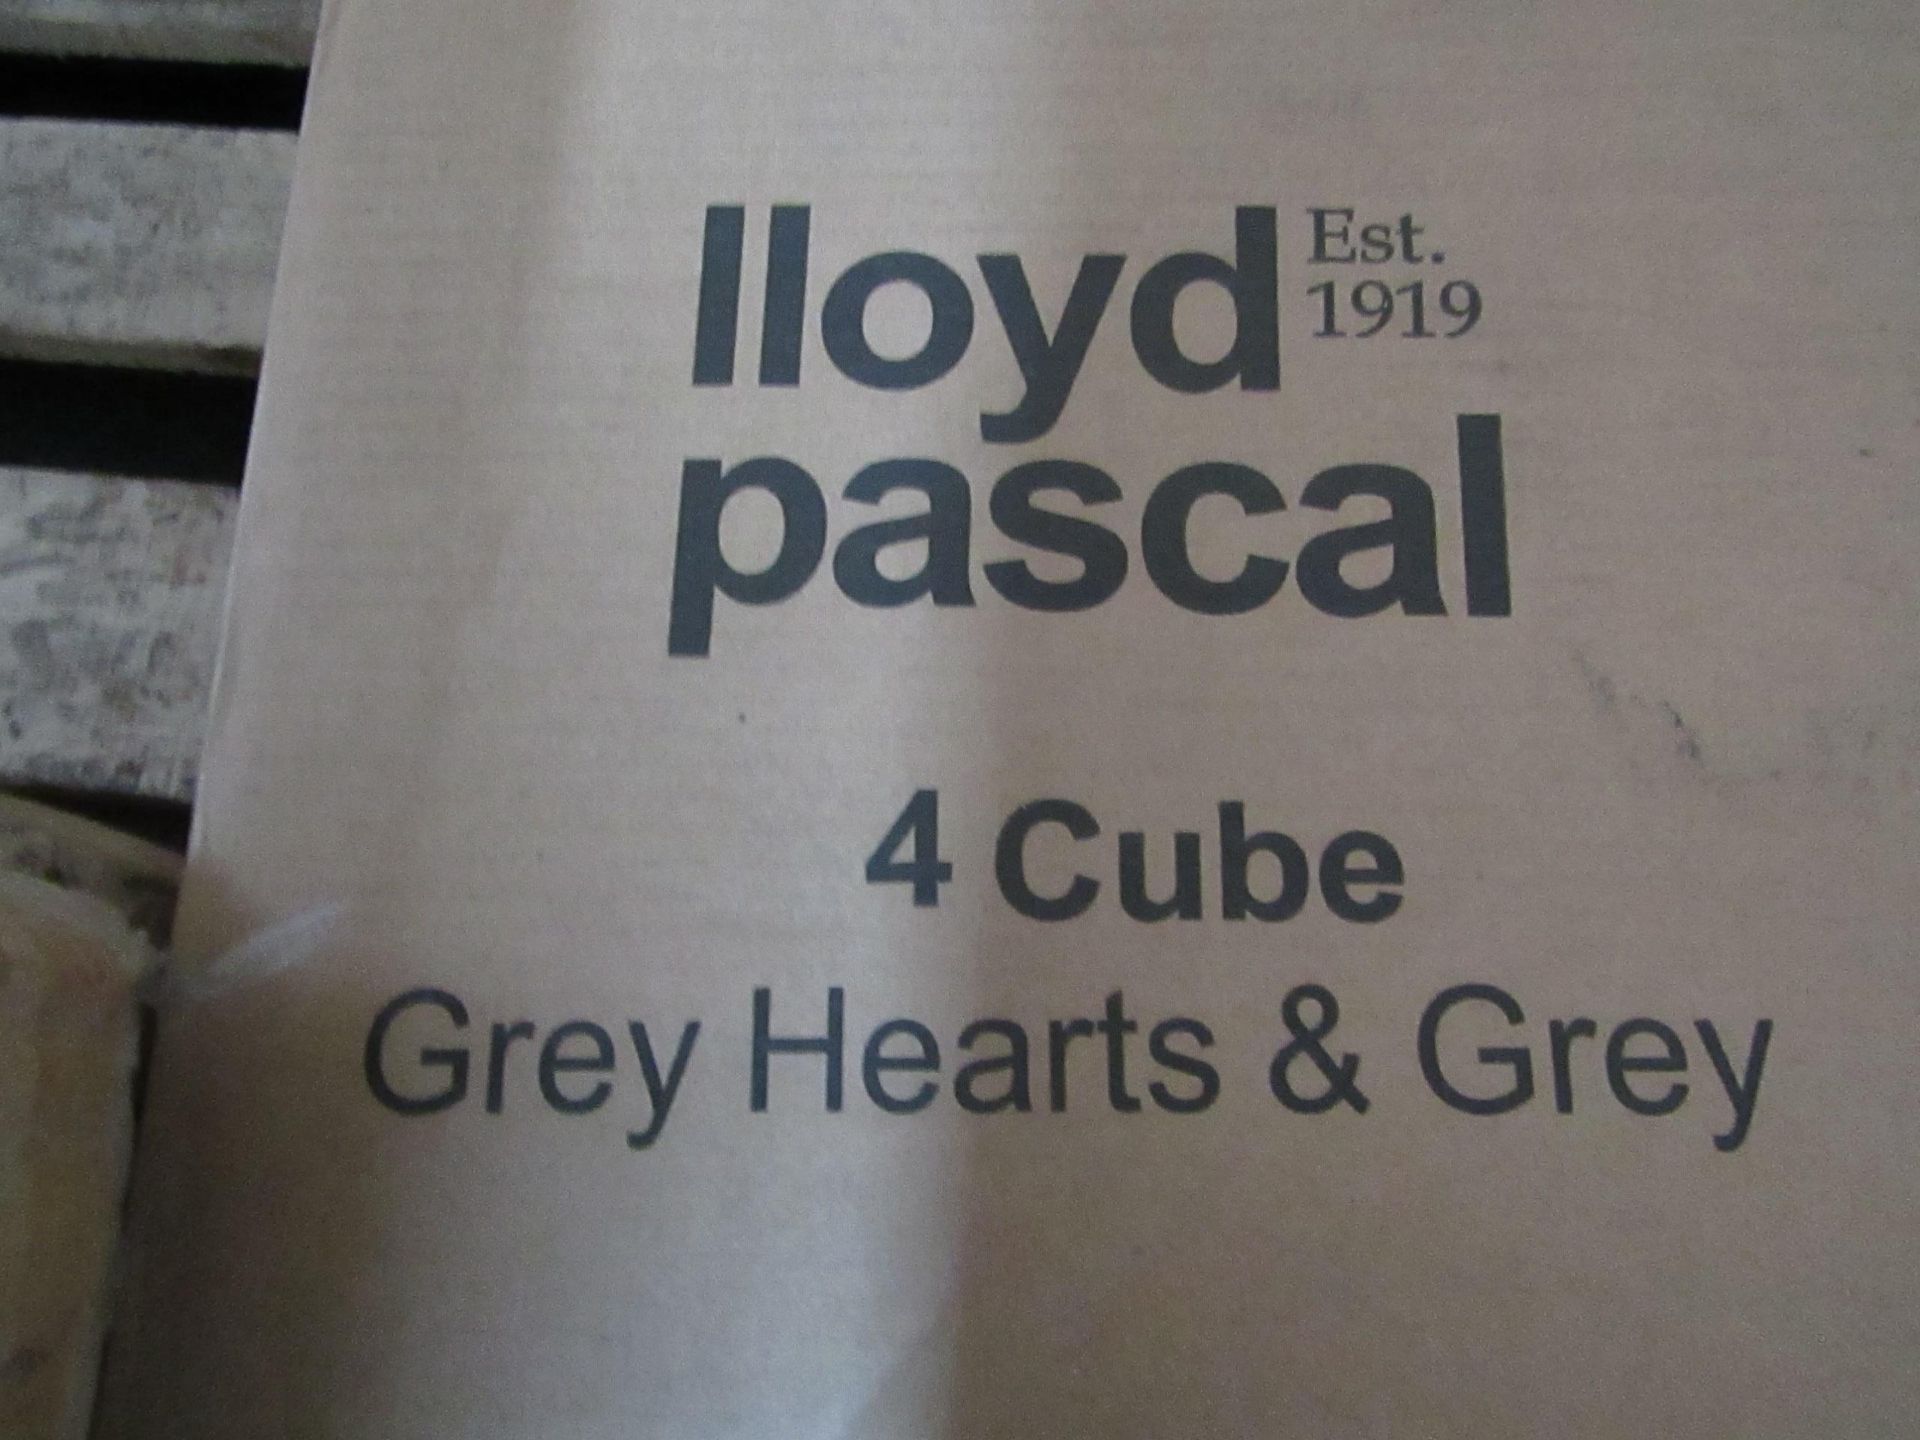 Lloyd Pascal - 4-Cube Unit Grey Hearts & Grey - Unchecked & Boxed. - Image 2 of 2